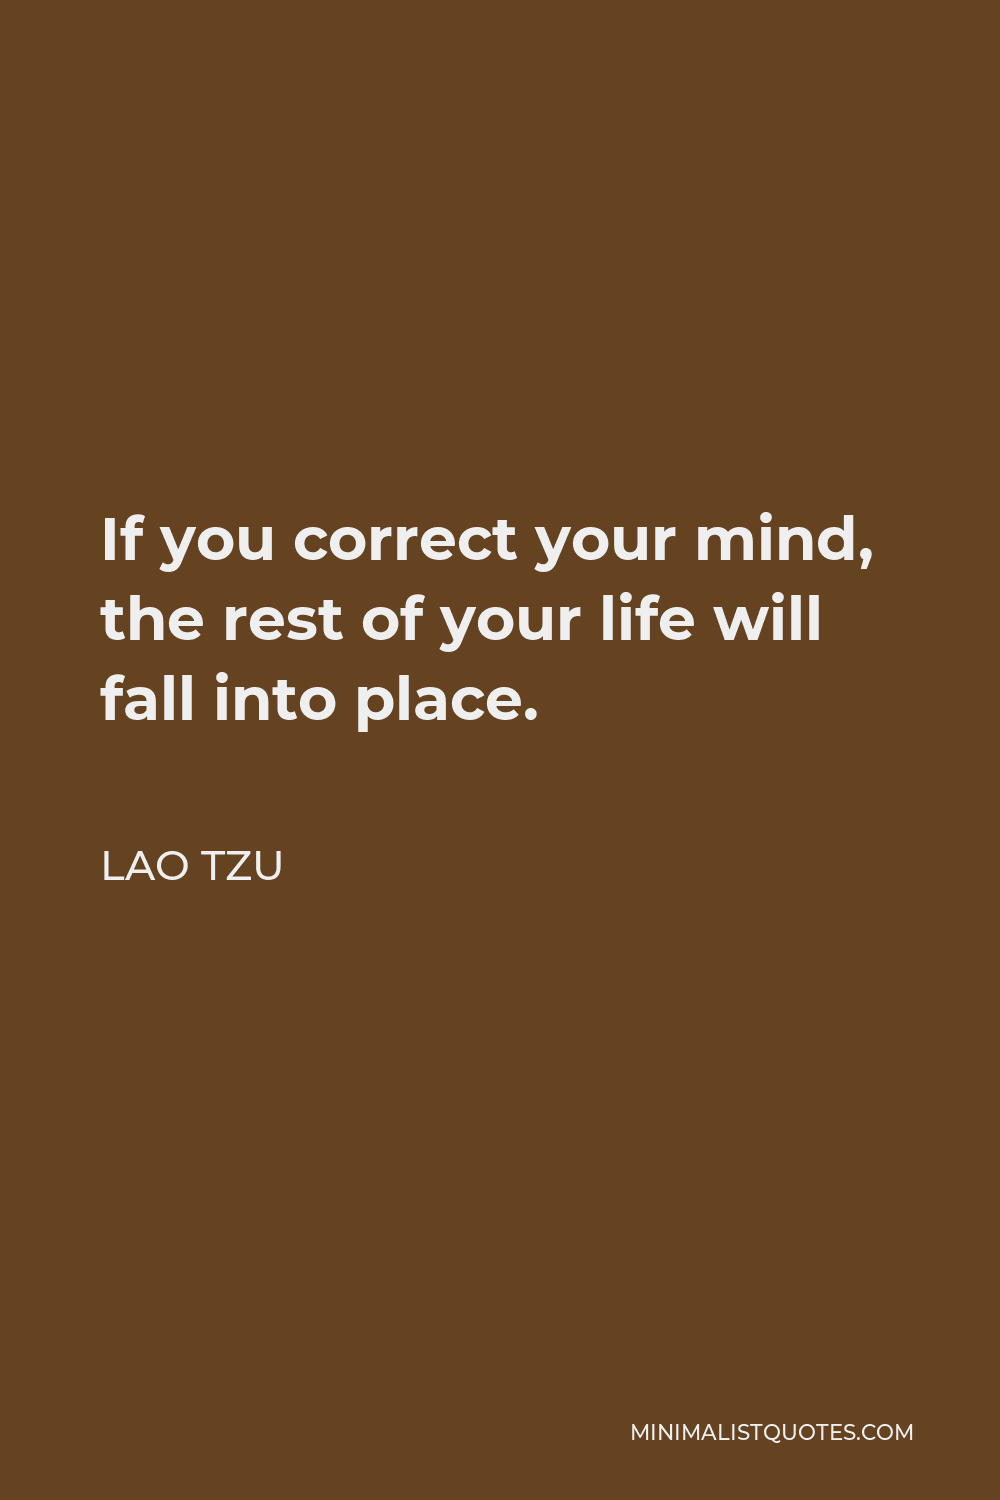 Lao Tzu Quote: If you correct your mind, the rest of your life will ...